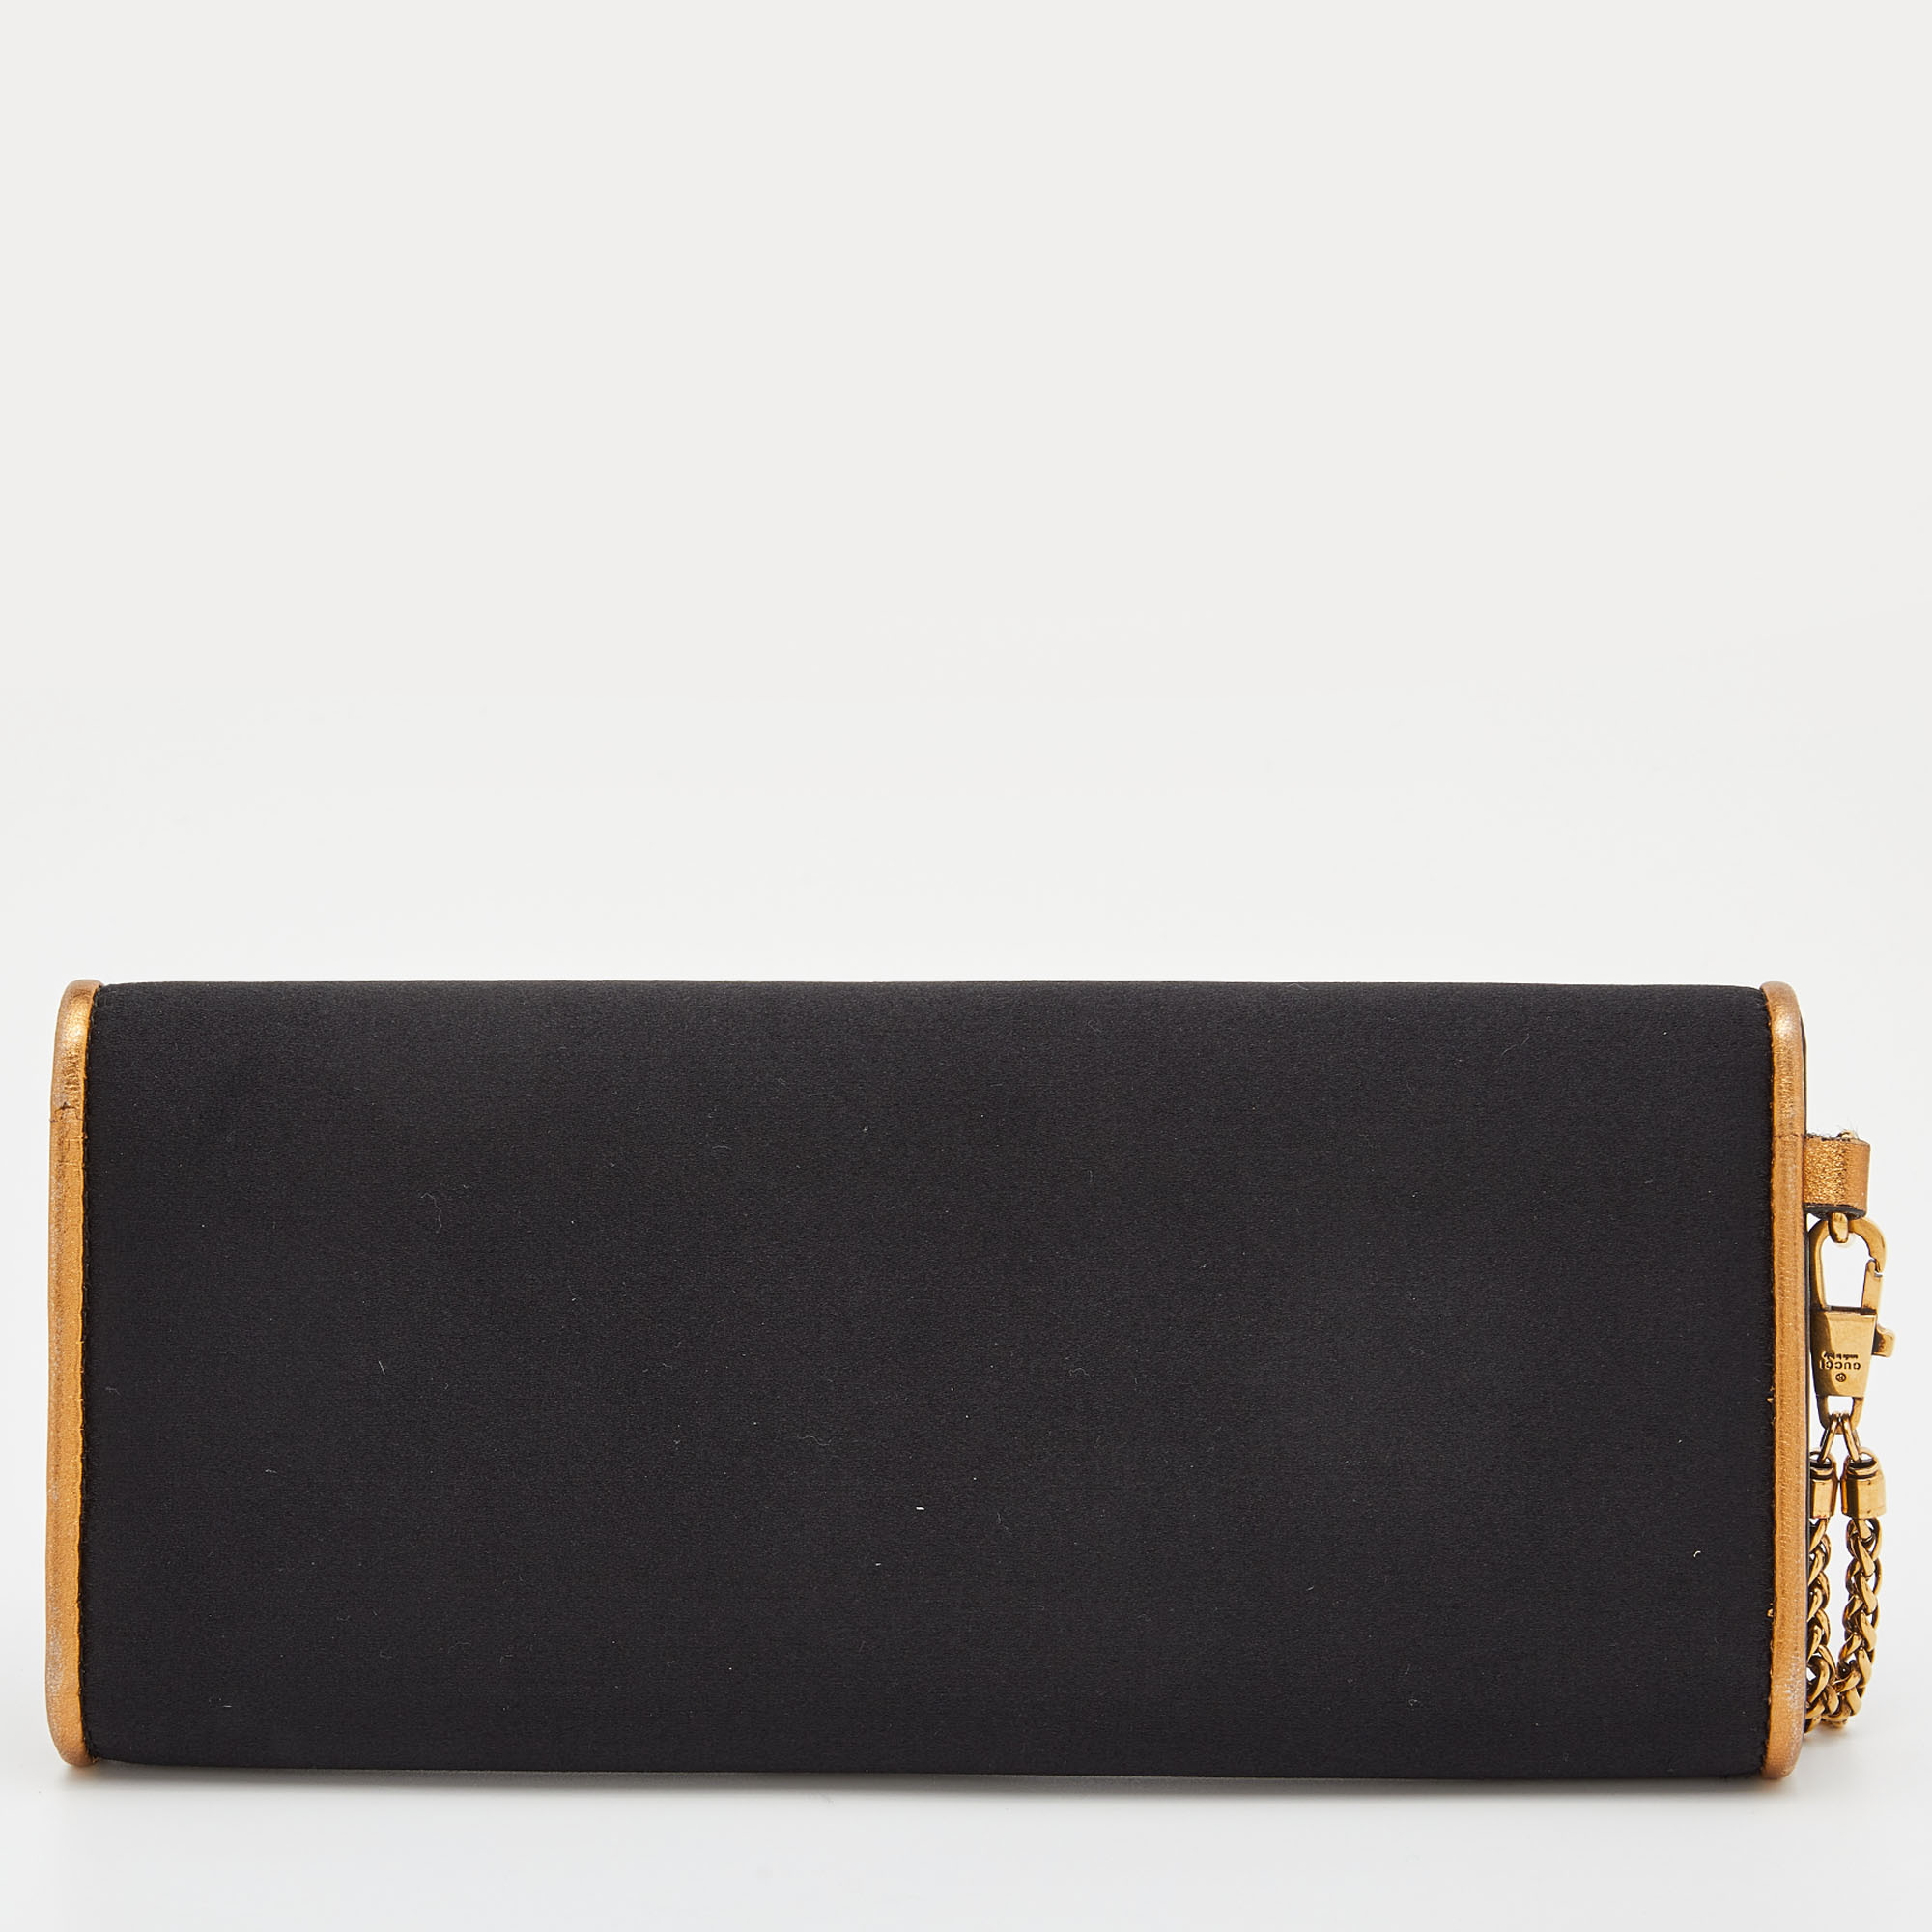 Gucci Black Satin And Leather Wristlet Clutch